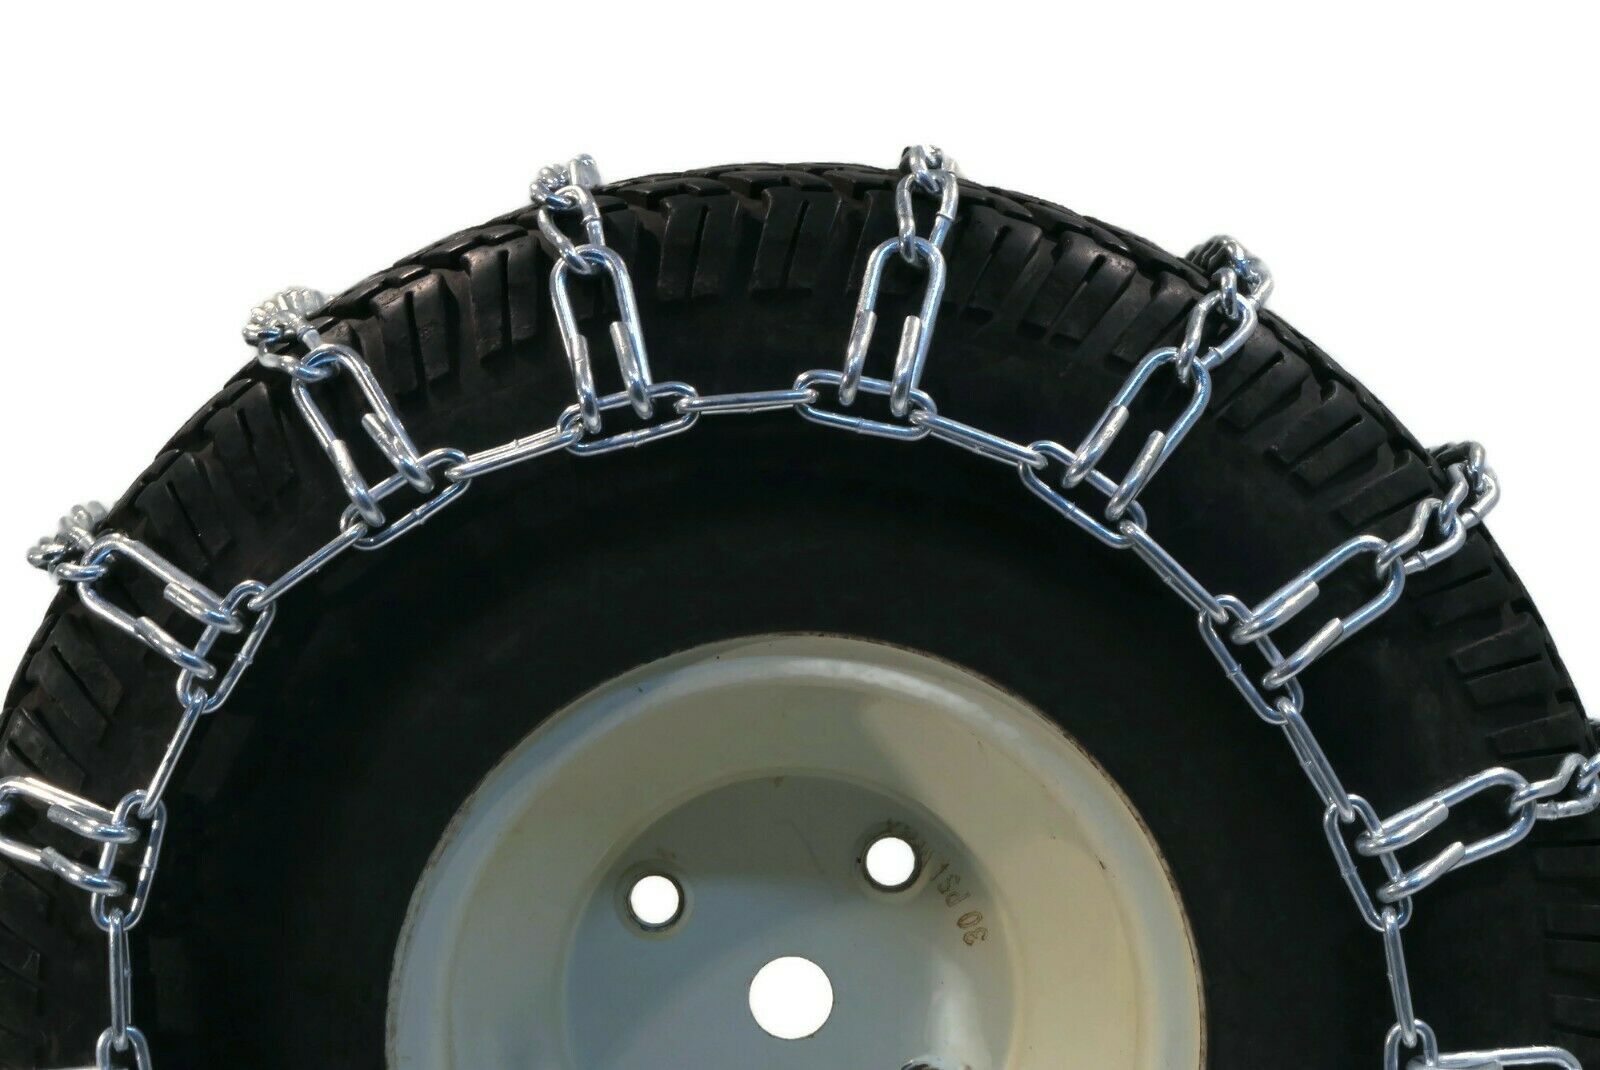 Pair 2 Link Tire Chains 26x12-12 for John Deere Lawn Mower Tractor Rider - image 4 of 6